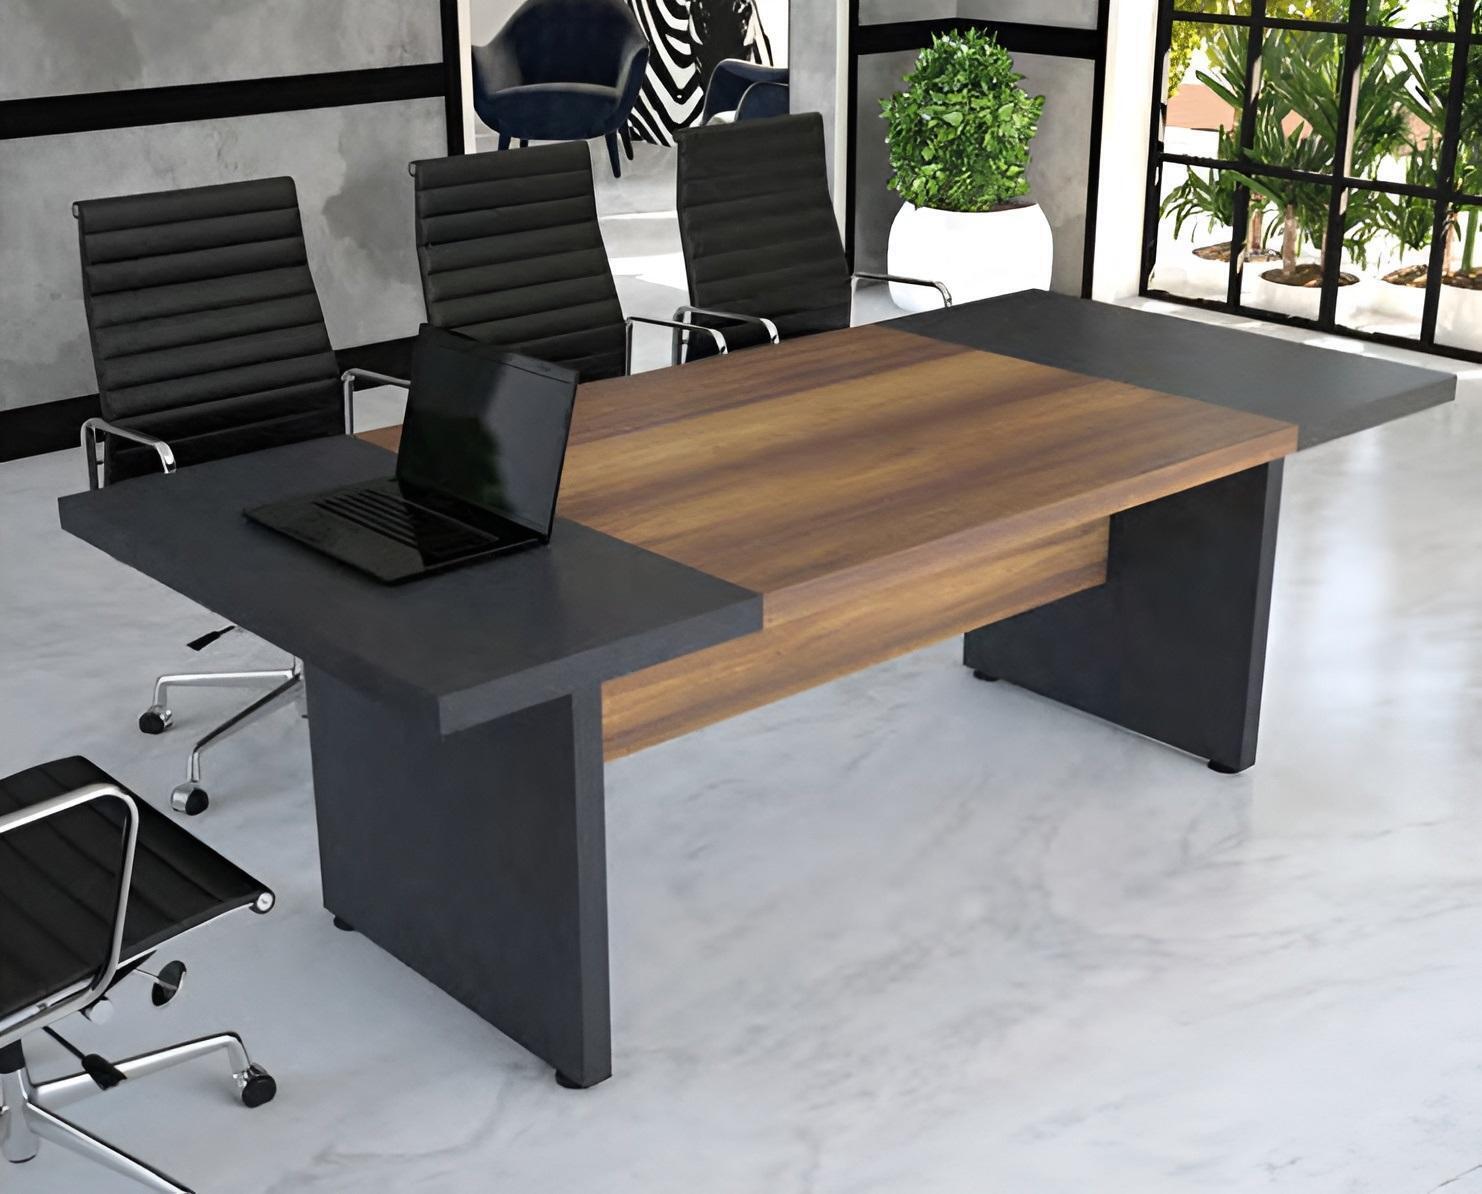 Large conference table meeting tables conference furniture brown wood 220